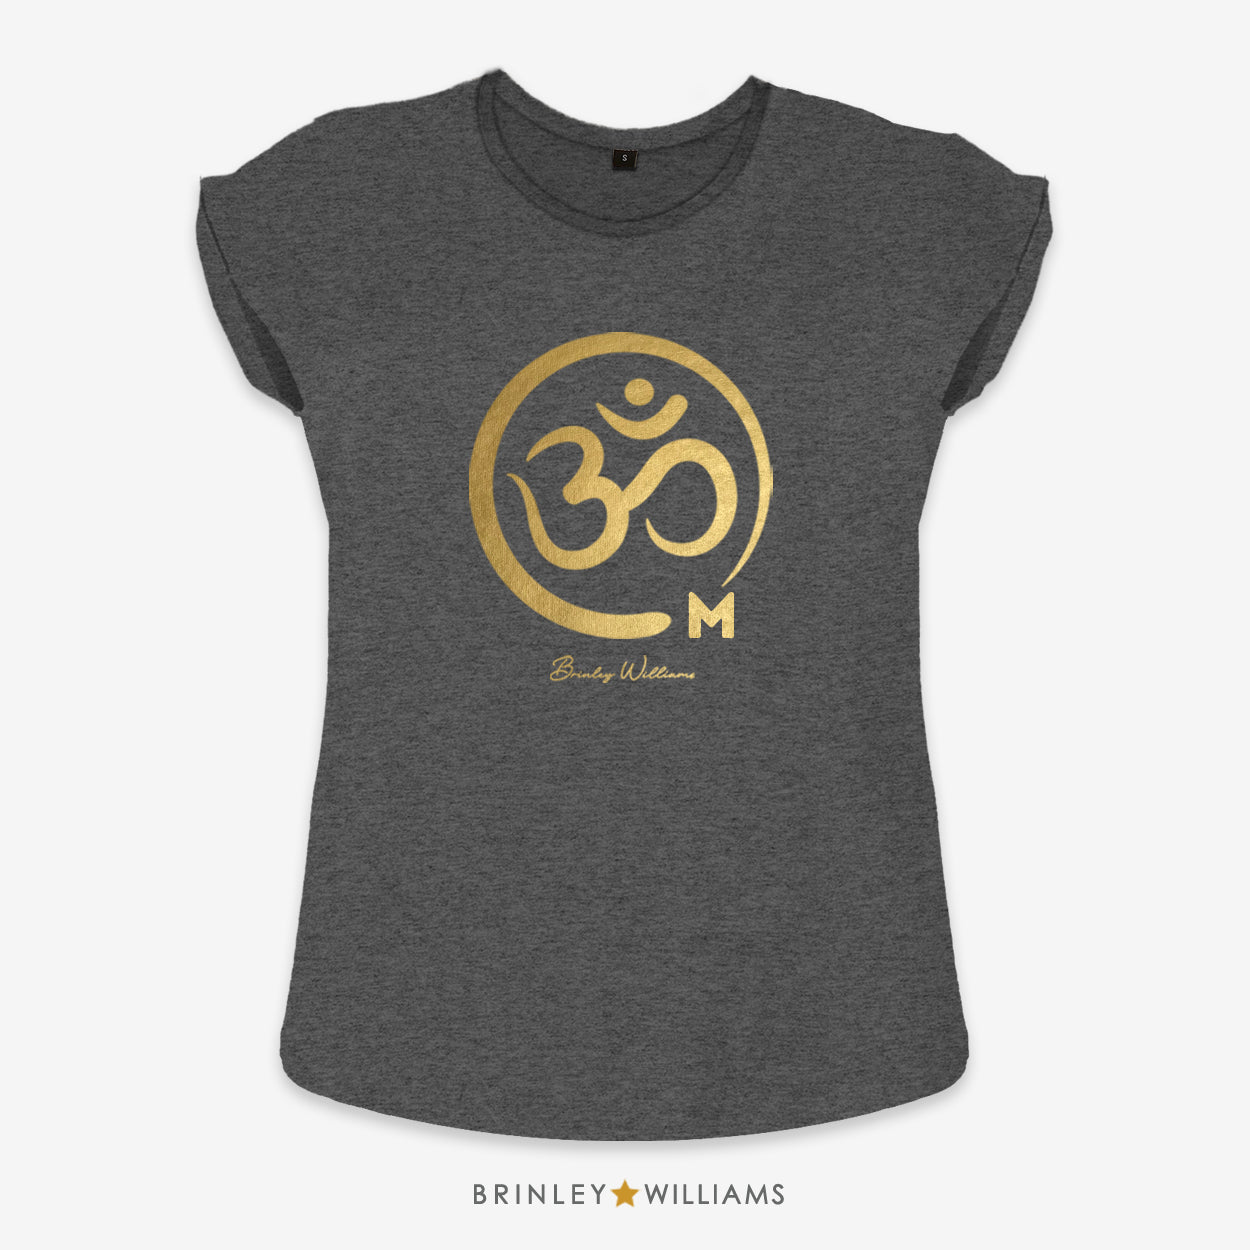 Om Rolled Sleeve T-shirt - Charcoal